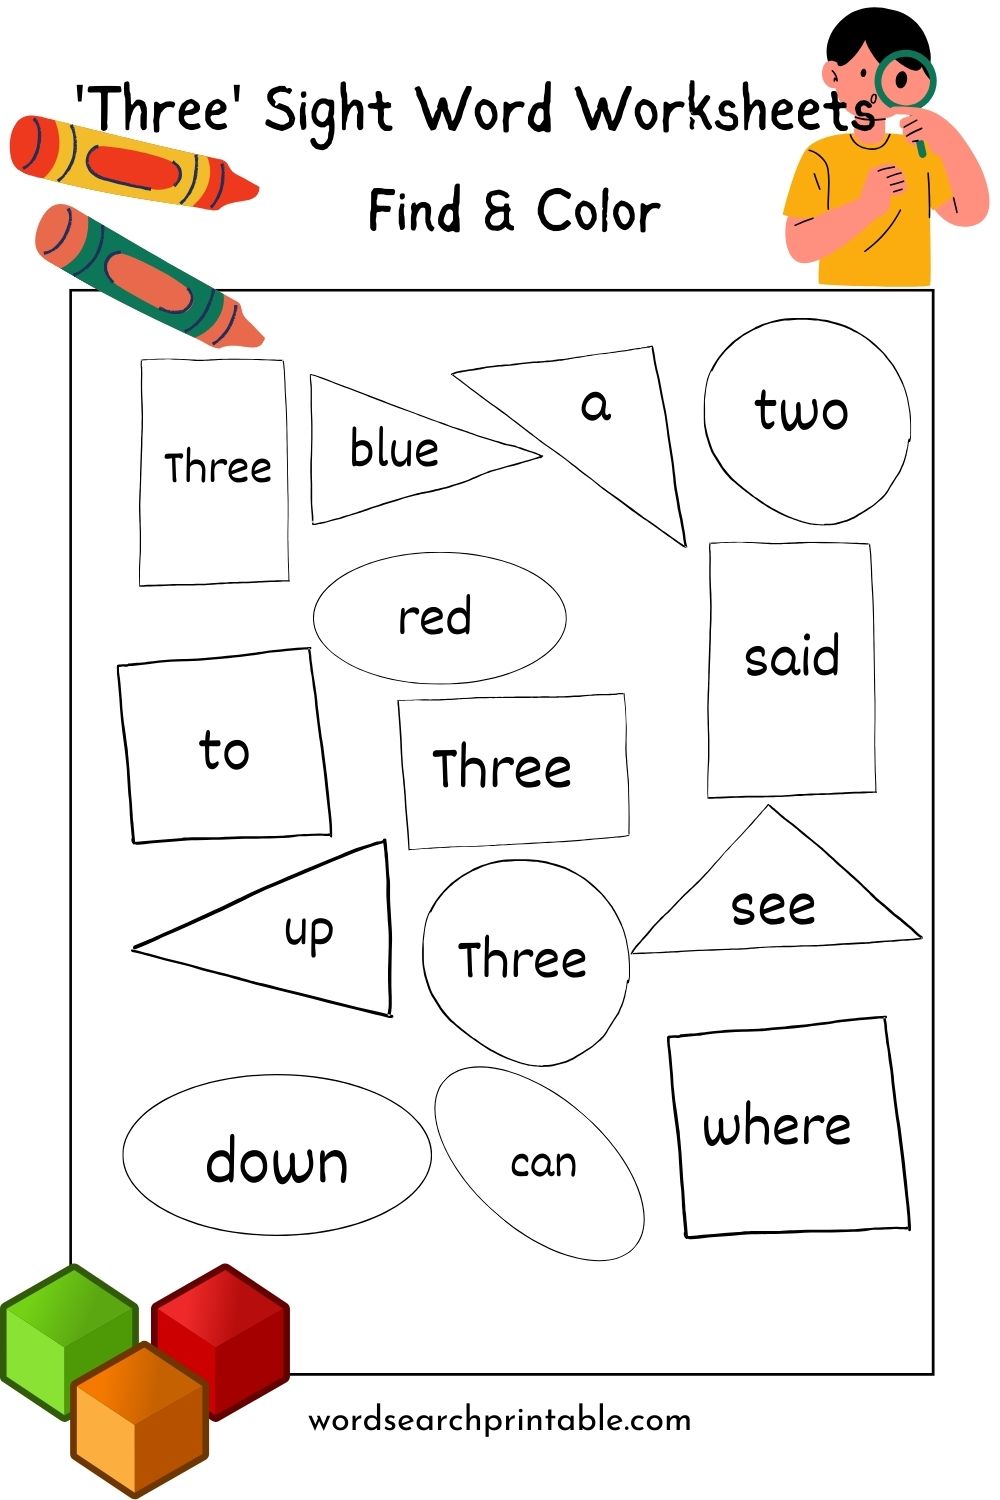 Find sight word Three and Color the geometric shape - Word hunt